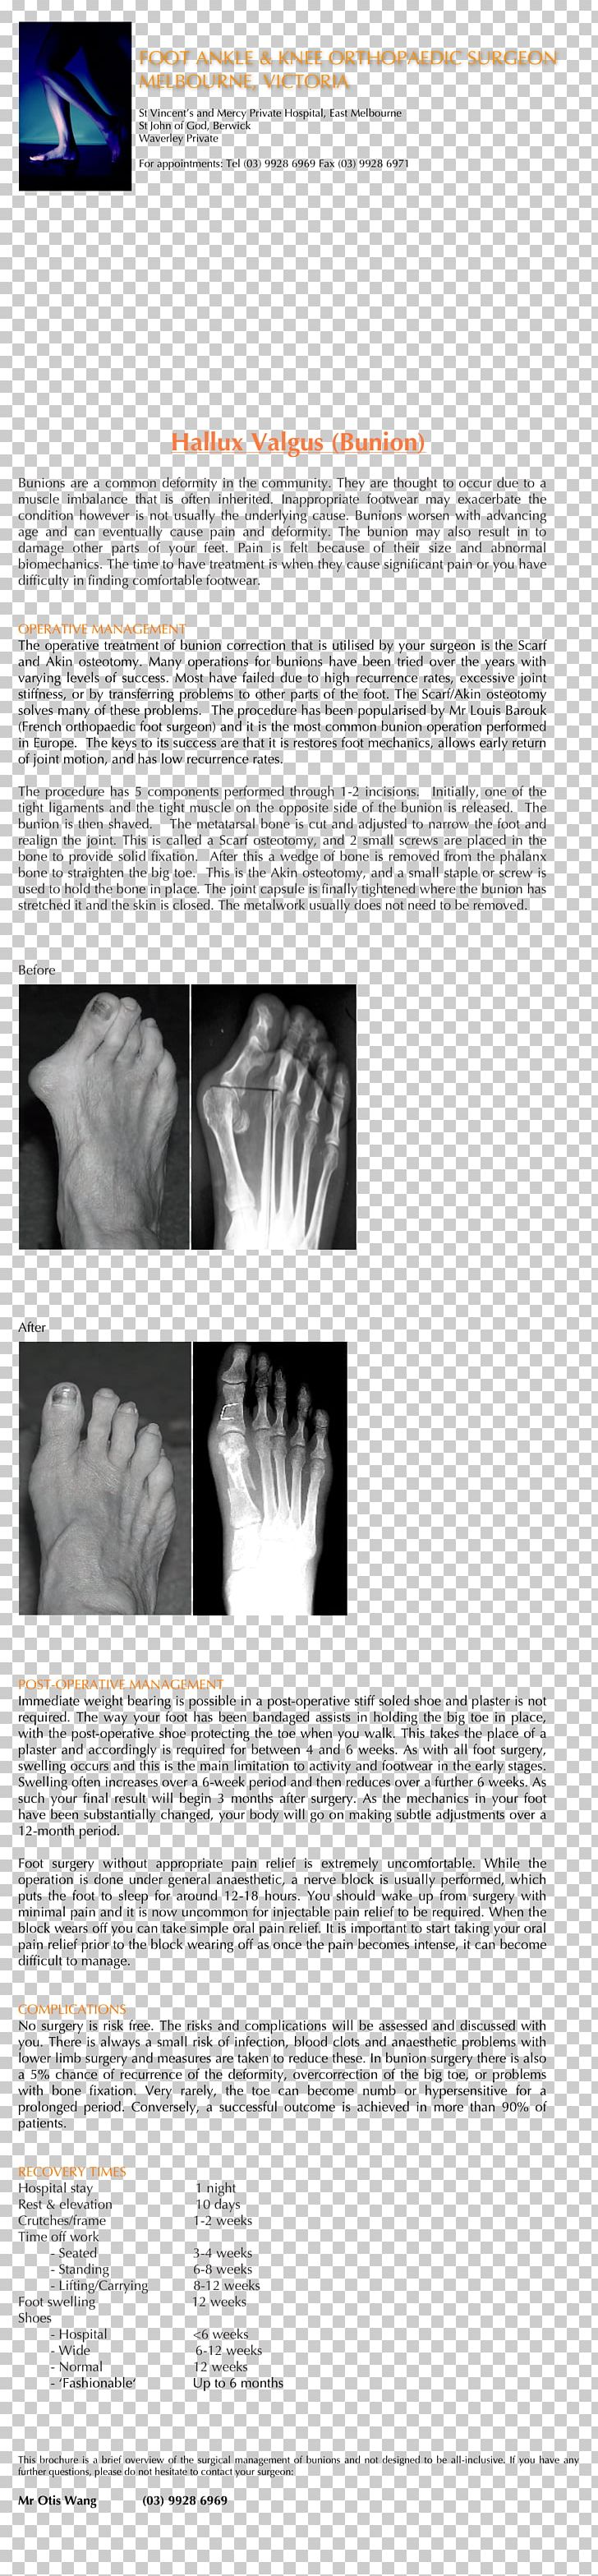 Mr Otis Wang Foot Ankle Melbourne Orthopaedic Surgeon Foot And Ankle Orthopedic Surgery PNG, Clipart, Angle, Ankle, Ankle Replacement, Black And White, Brochure Free PNG Download